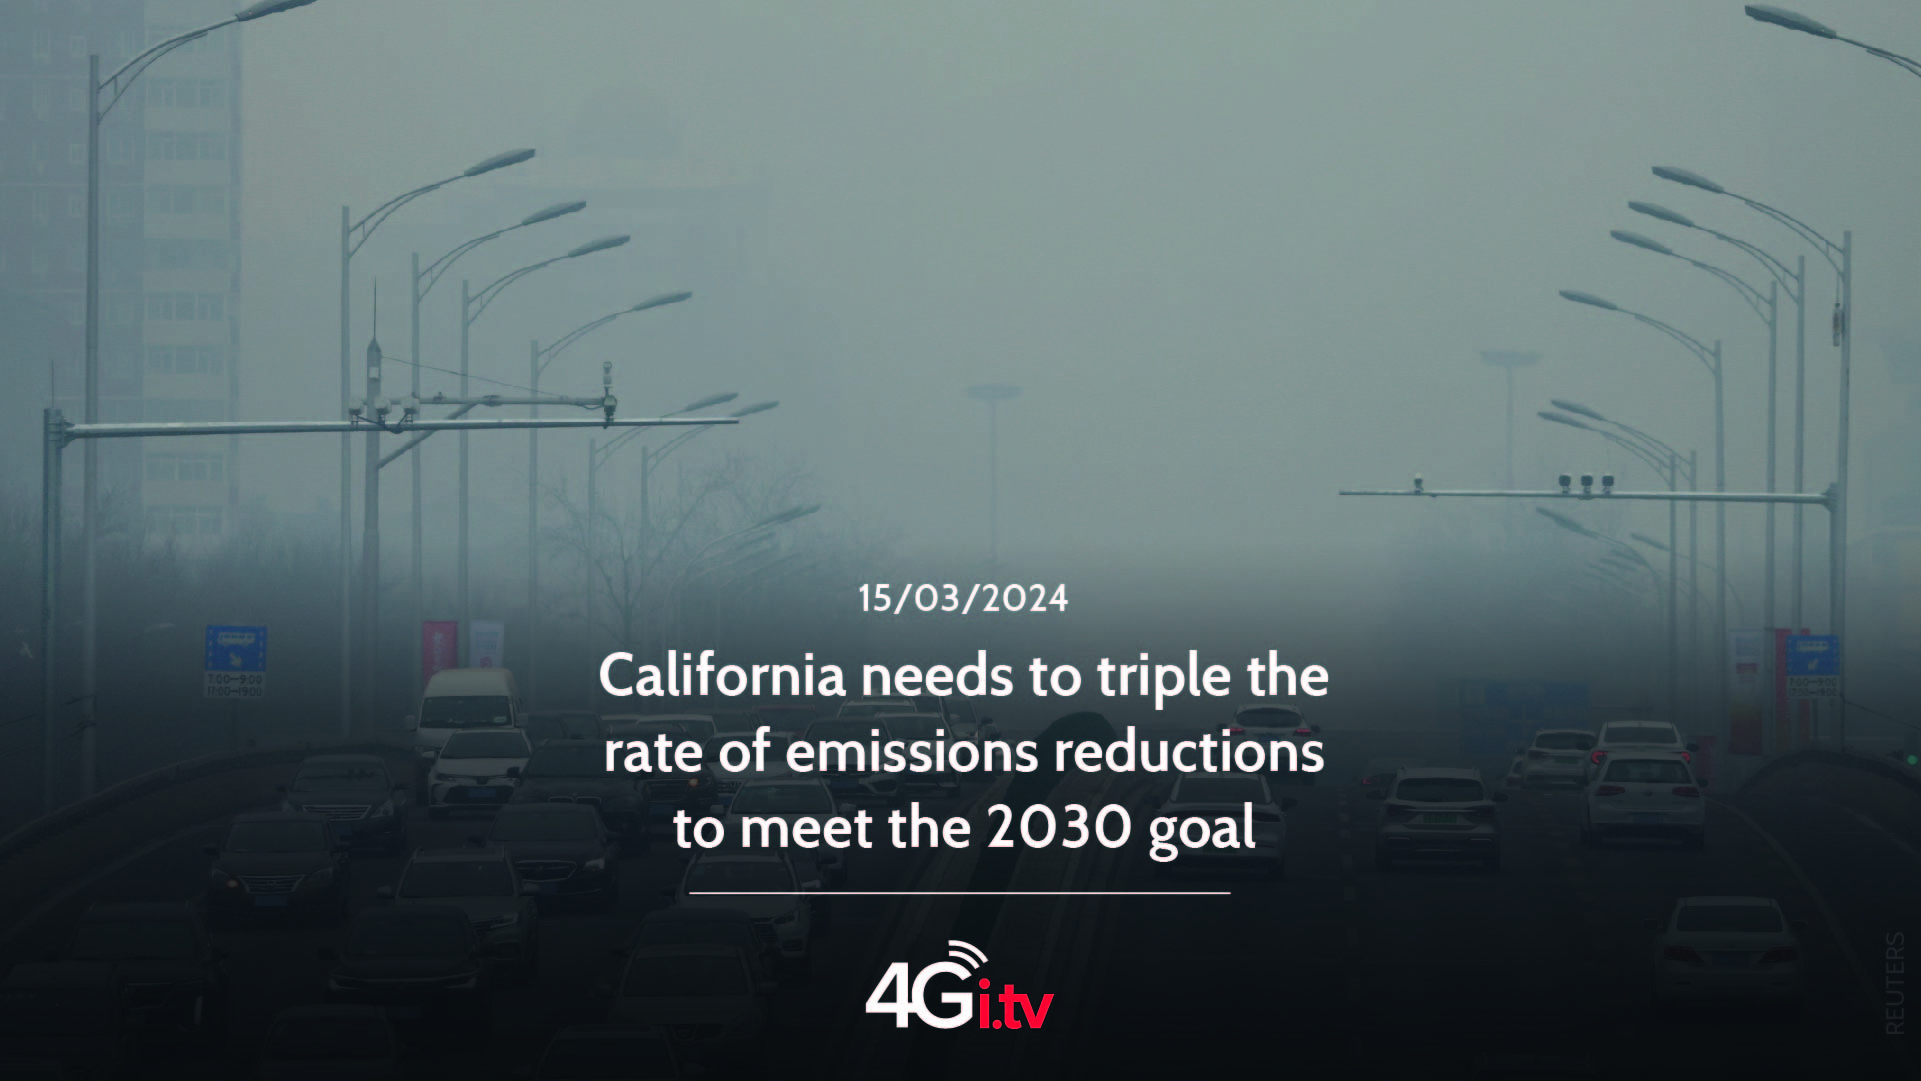 Lesen Sie mehr über den Artikel California needs to triple the rate of emissions reductions to meet the 2030 goal